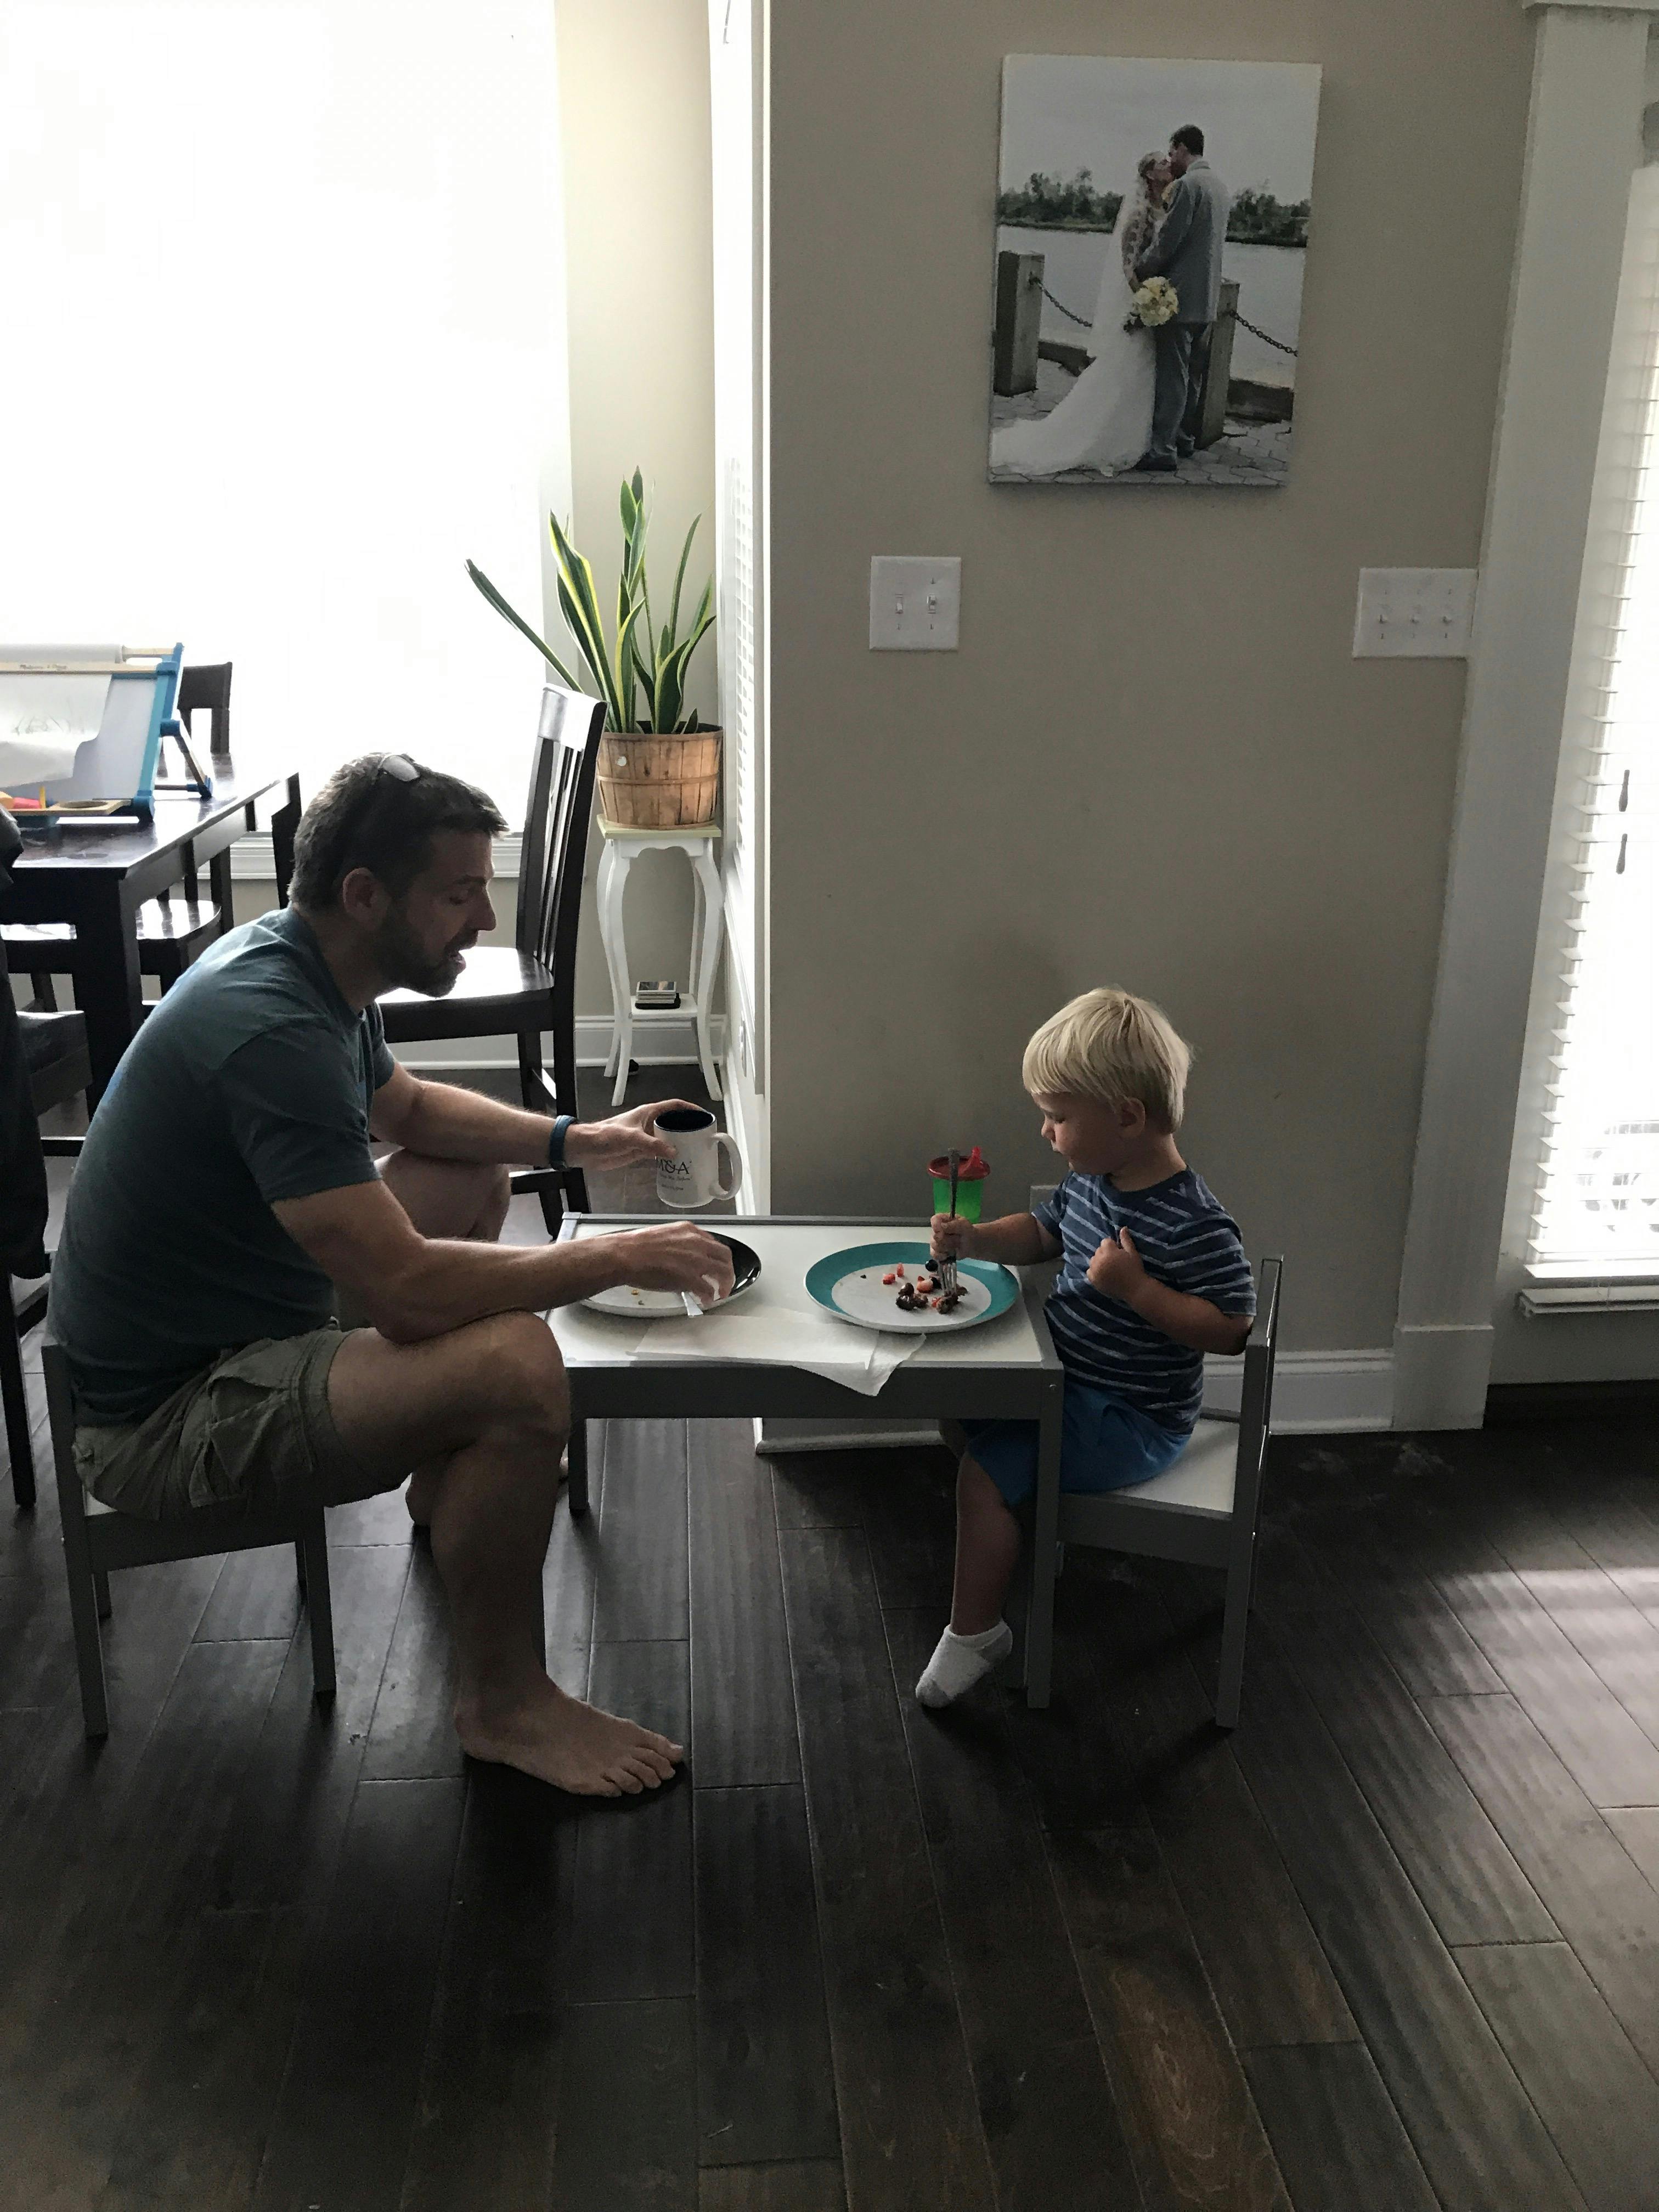 A grandpa and kid sit at a small table.